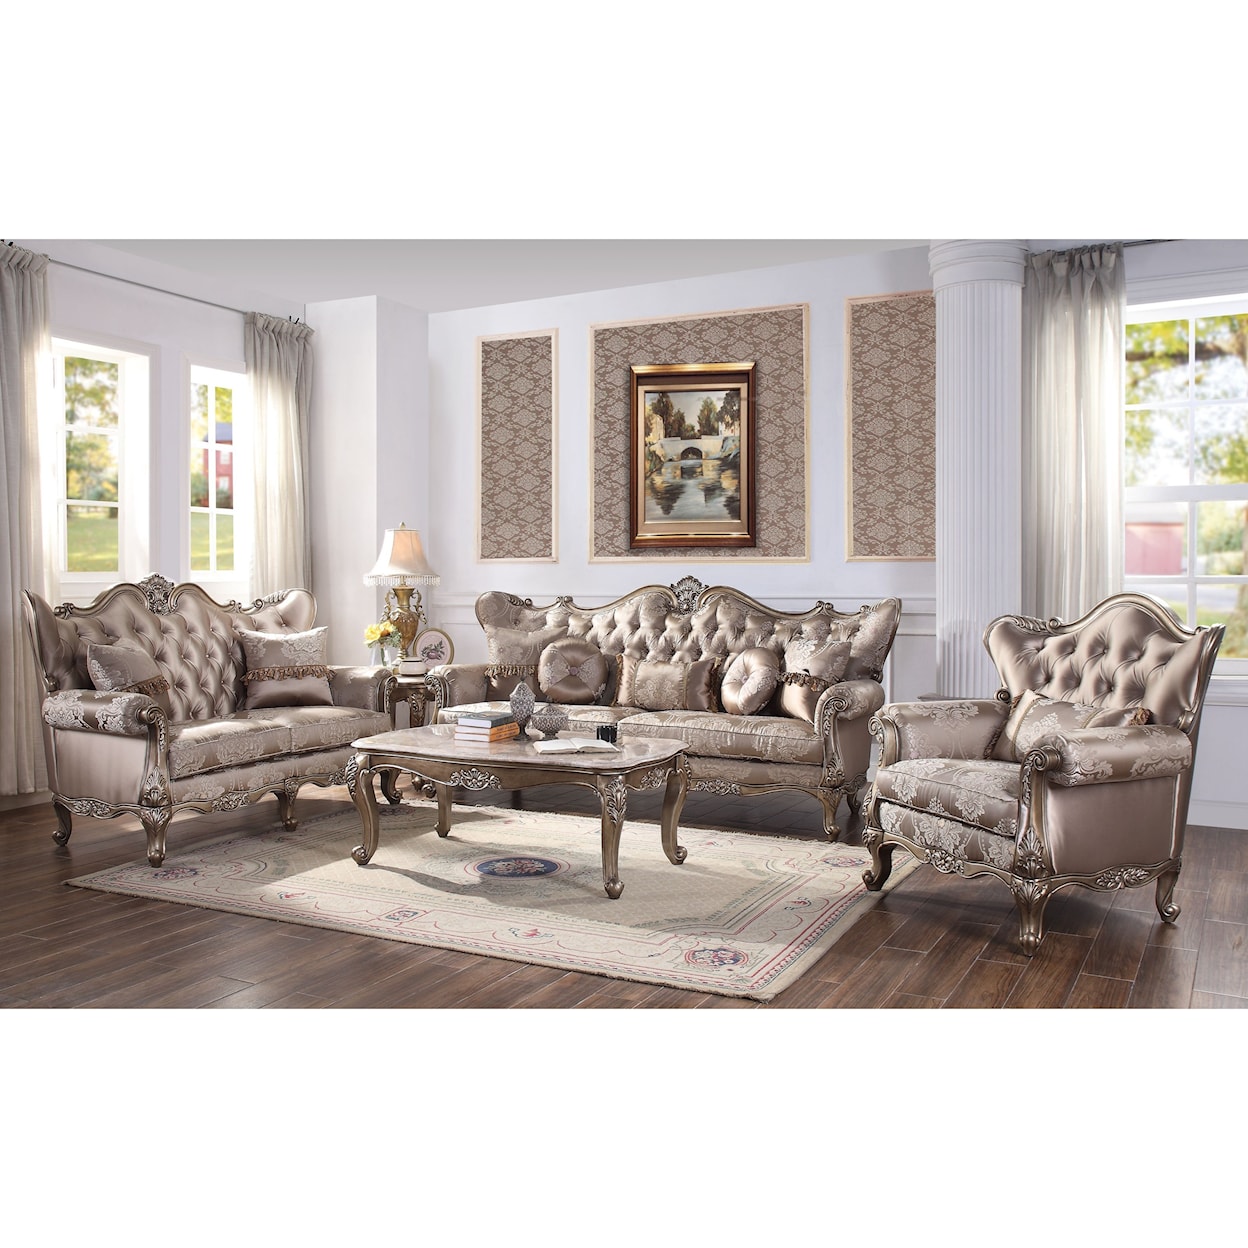 Acme Furniture Jayceon Living Room Group